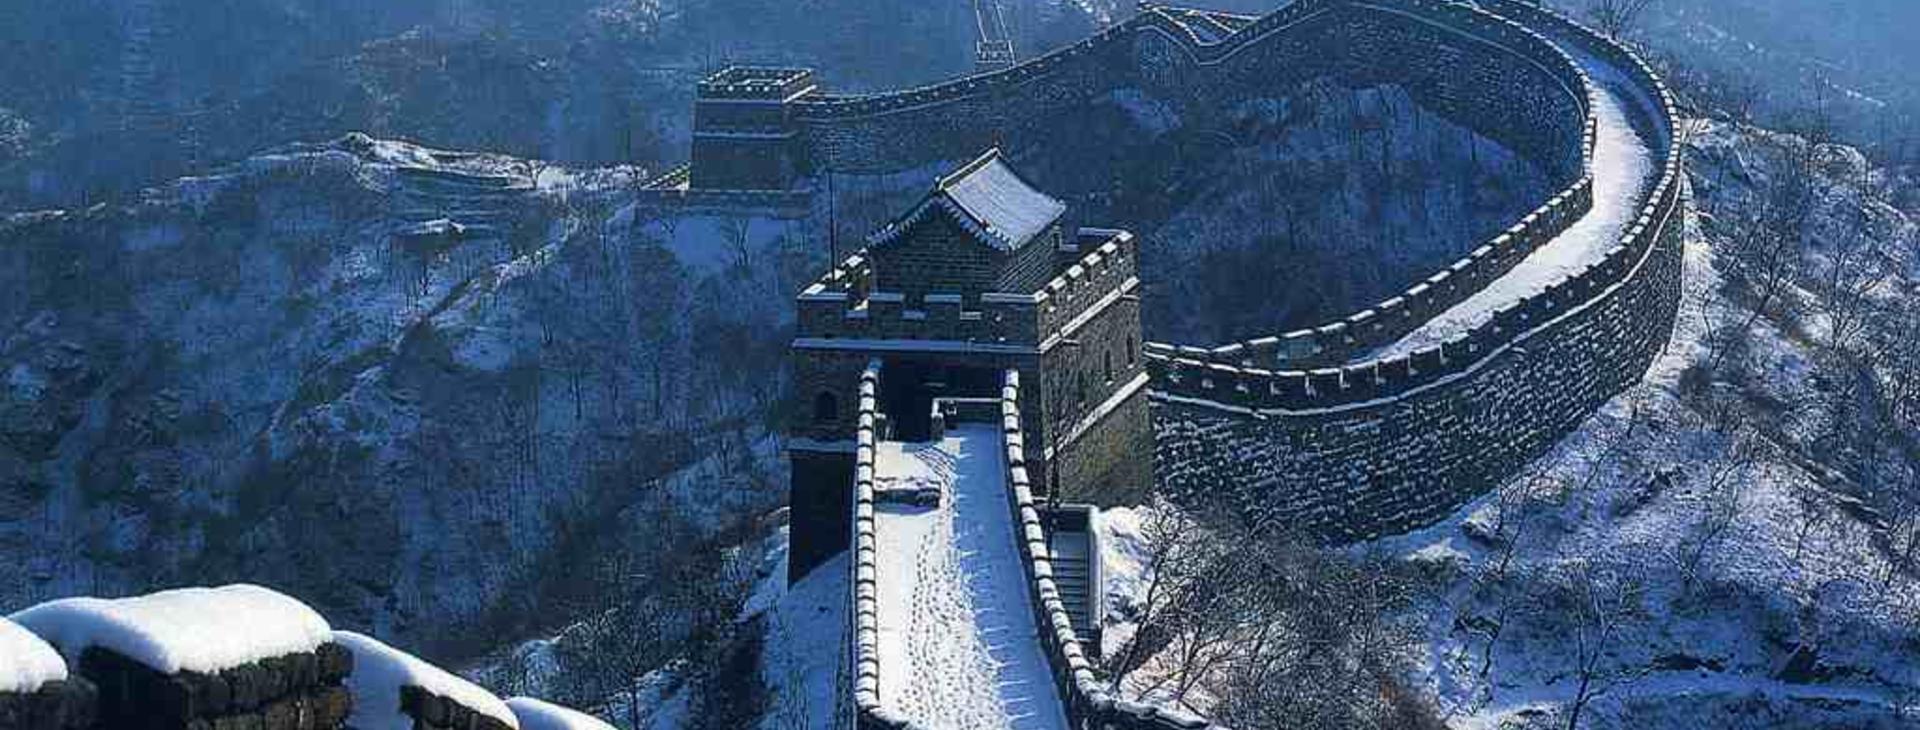 great wall of china with snow